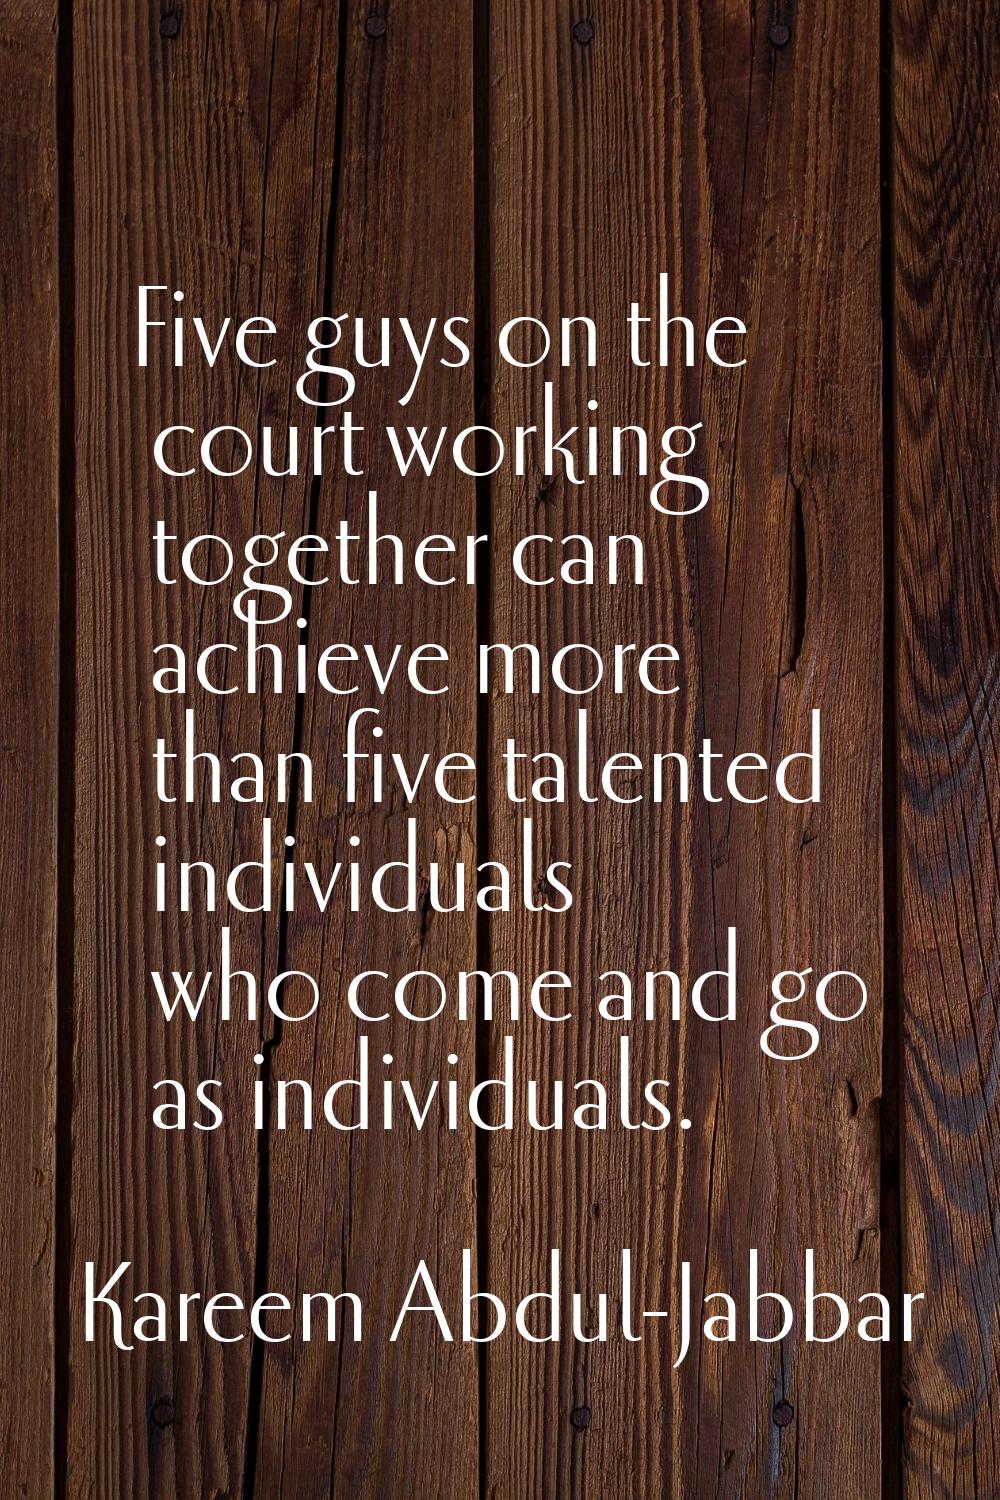 Five guys on the court working together can achieve more than five talented individuals who come an